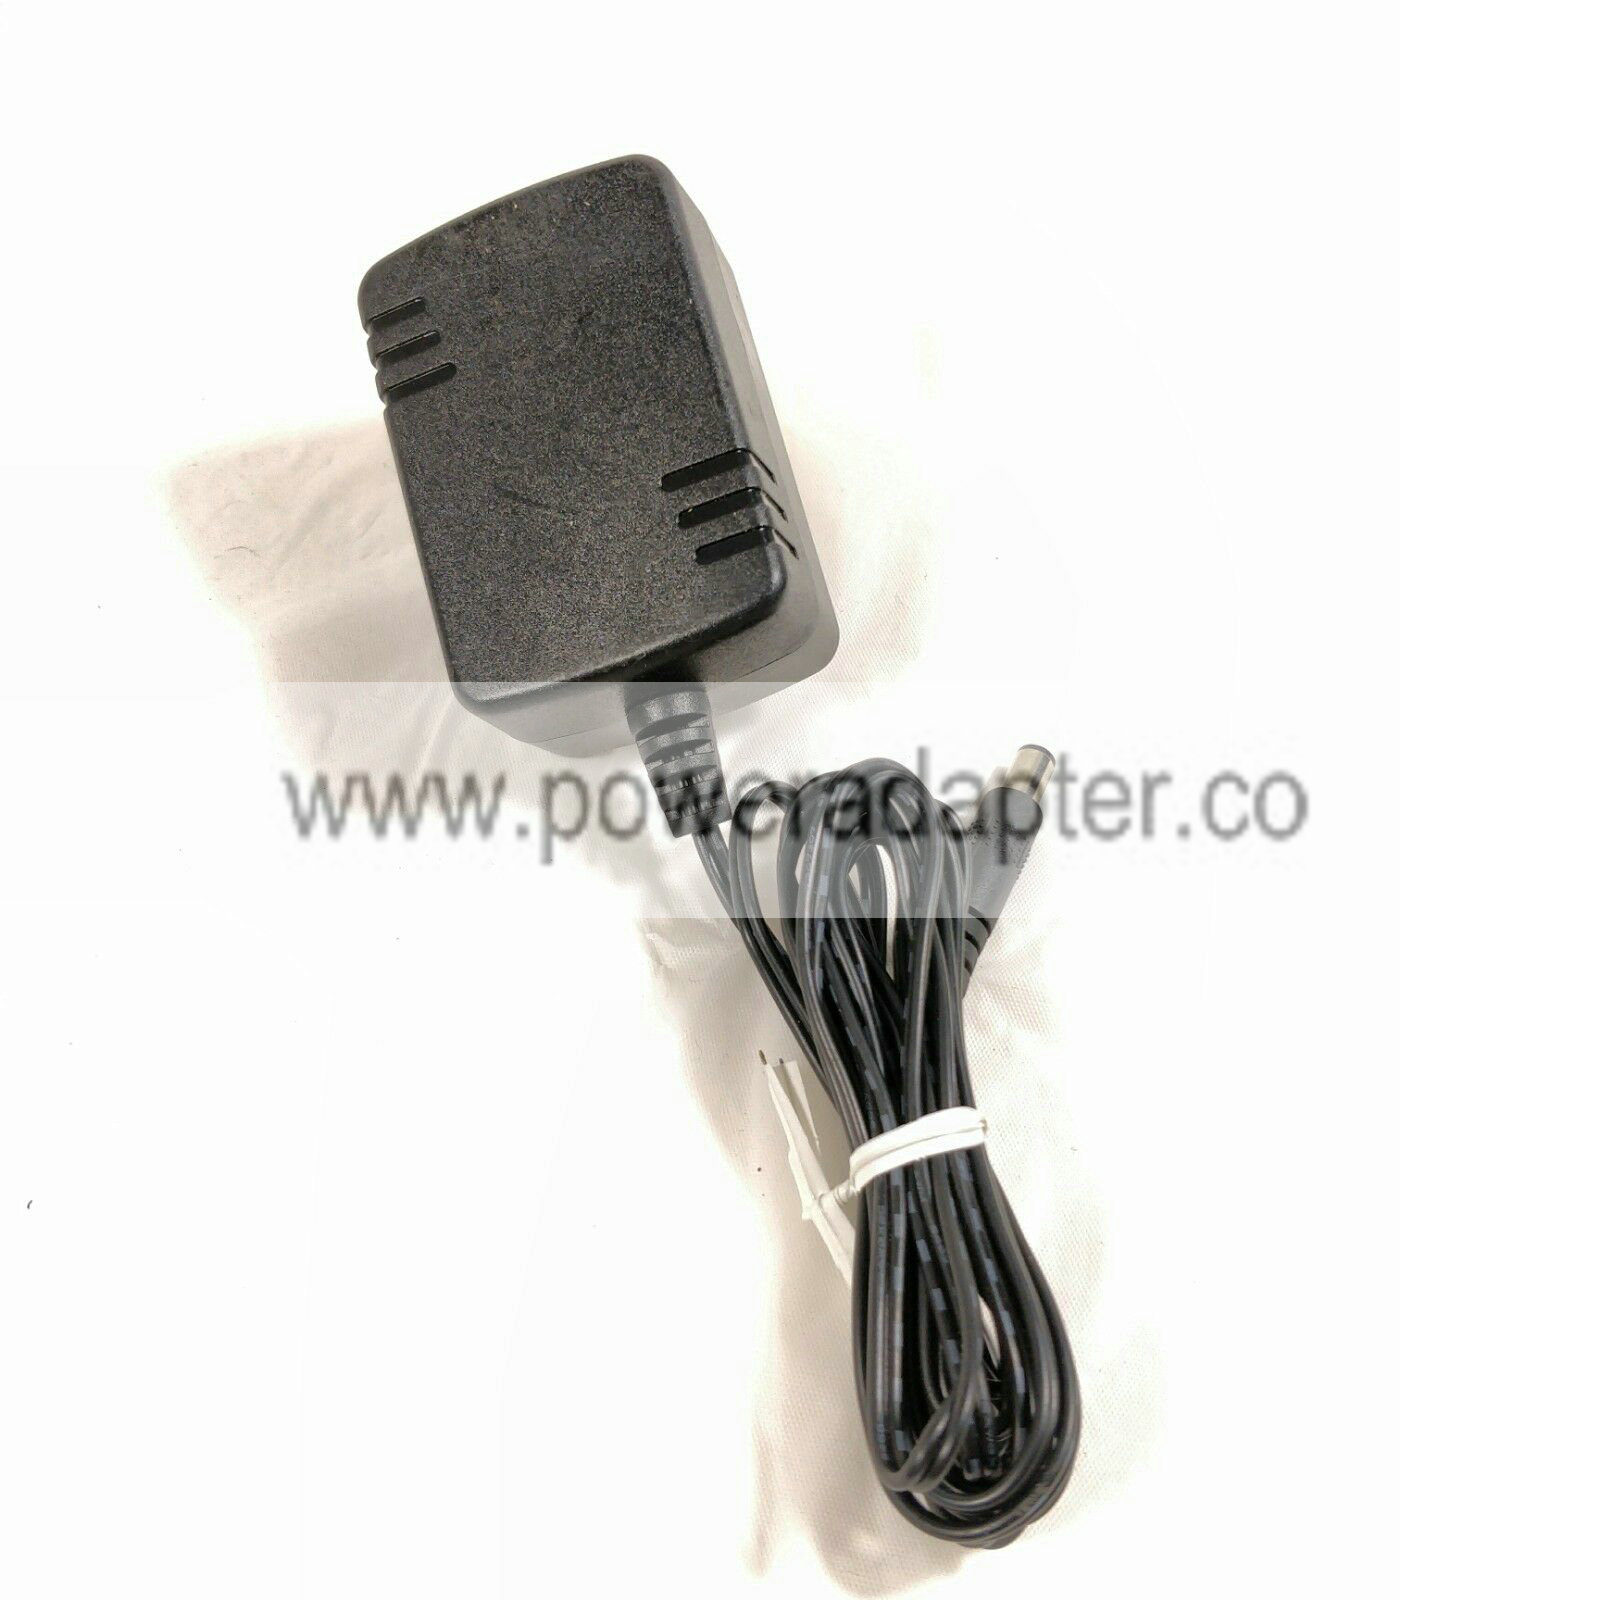 Challenger HK-M109-U120-LH AC Power Supply Adapter Charger Output: 12V DC 0.75A Quick Info: OEM Challenger power supp